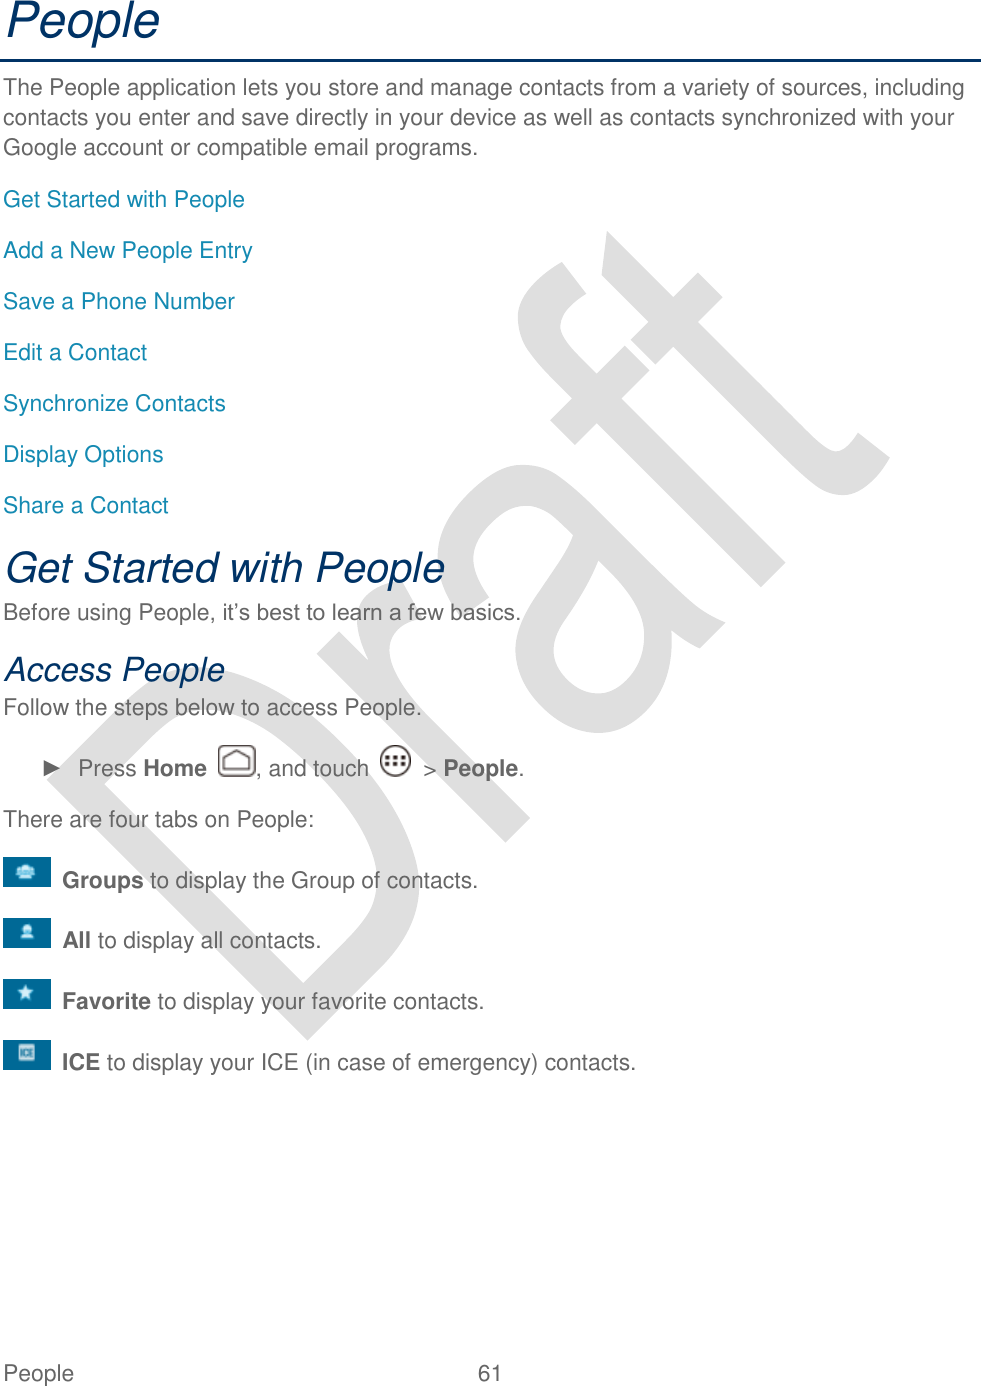  People  61   People The People application lets you store and manage contacts from a variety of sources, including contacts you enter and save directly in your device as well as contacts synchronized with your Google account or compatible email programs. Get Started with People Add a New People Entry Save a Phone Number Edit a Contact Synchronize Contacts Display Options Share a Contact Get Started with People Before using People, it‟s best to learn a few basics. Access People Follow the steps below to access People. ►  Press Home  , and touch    &gt; People. There are four tabs on People:  Groups to display the Group of contacts.  All to display all contacts.  Favorite to display your favorite contacts.  ICE to display your ICE (in case of emergency) contacts.  